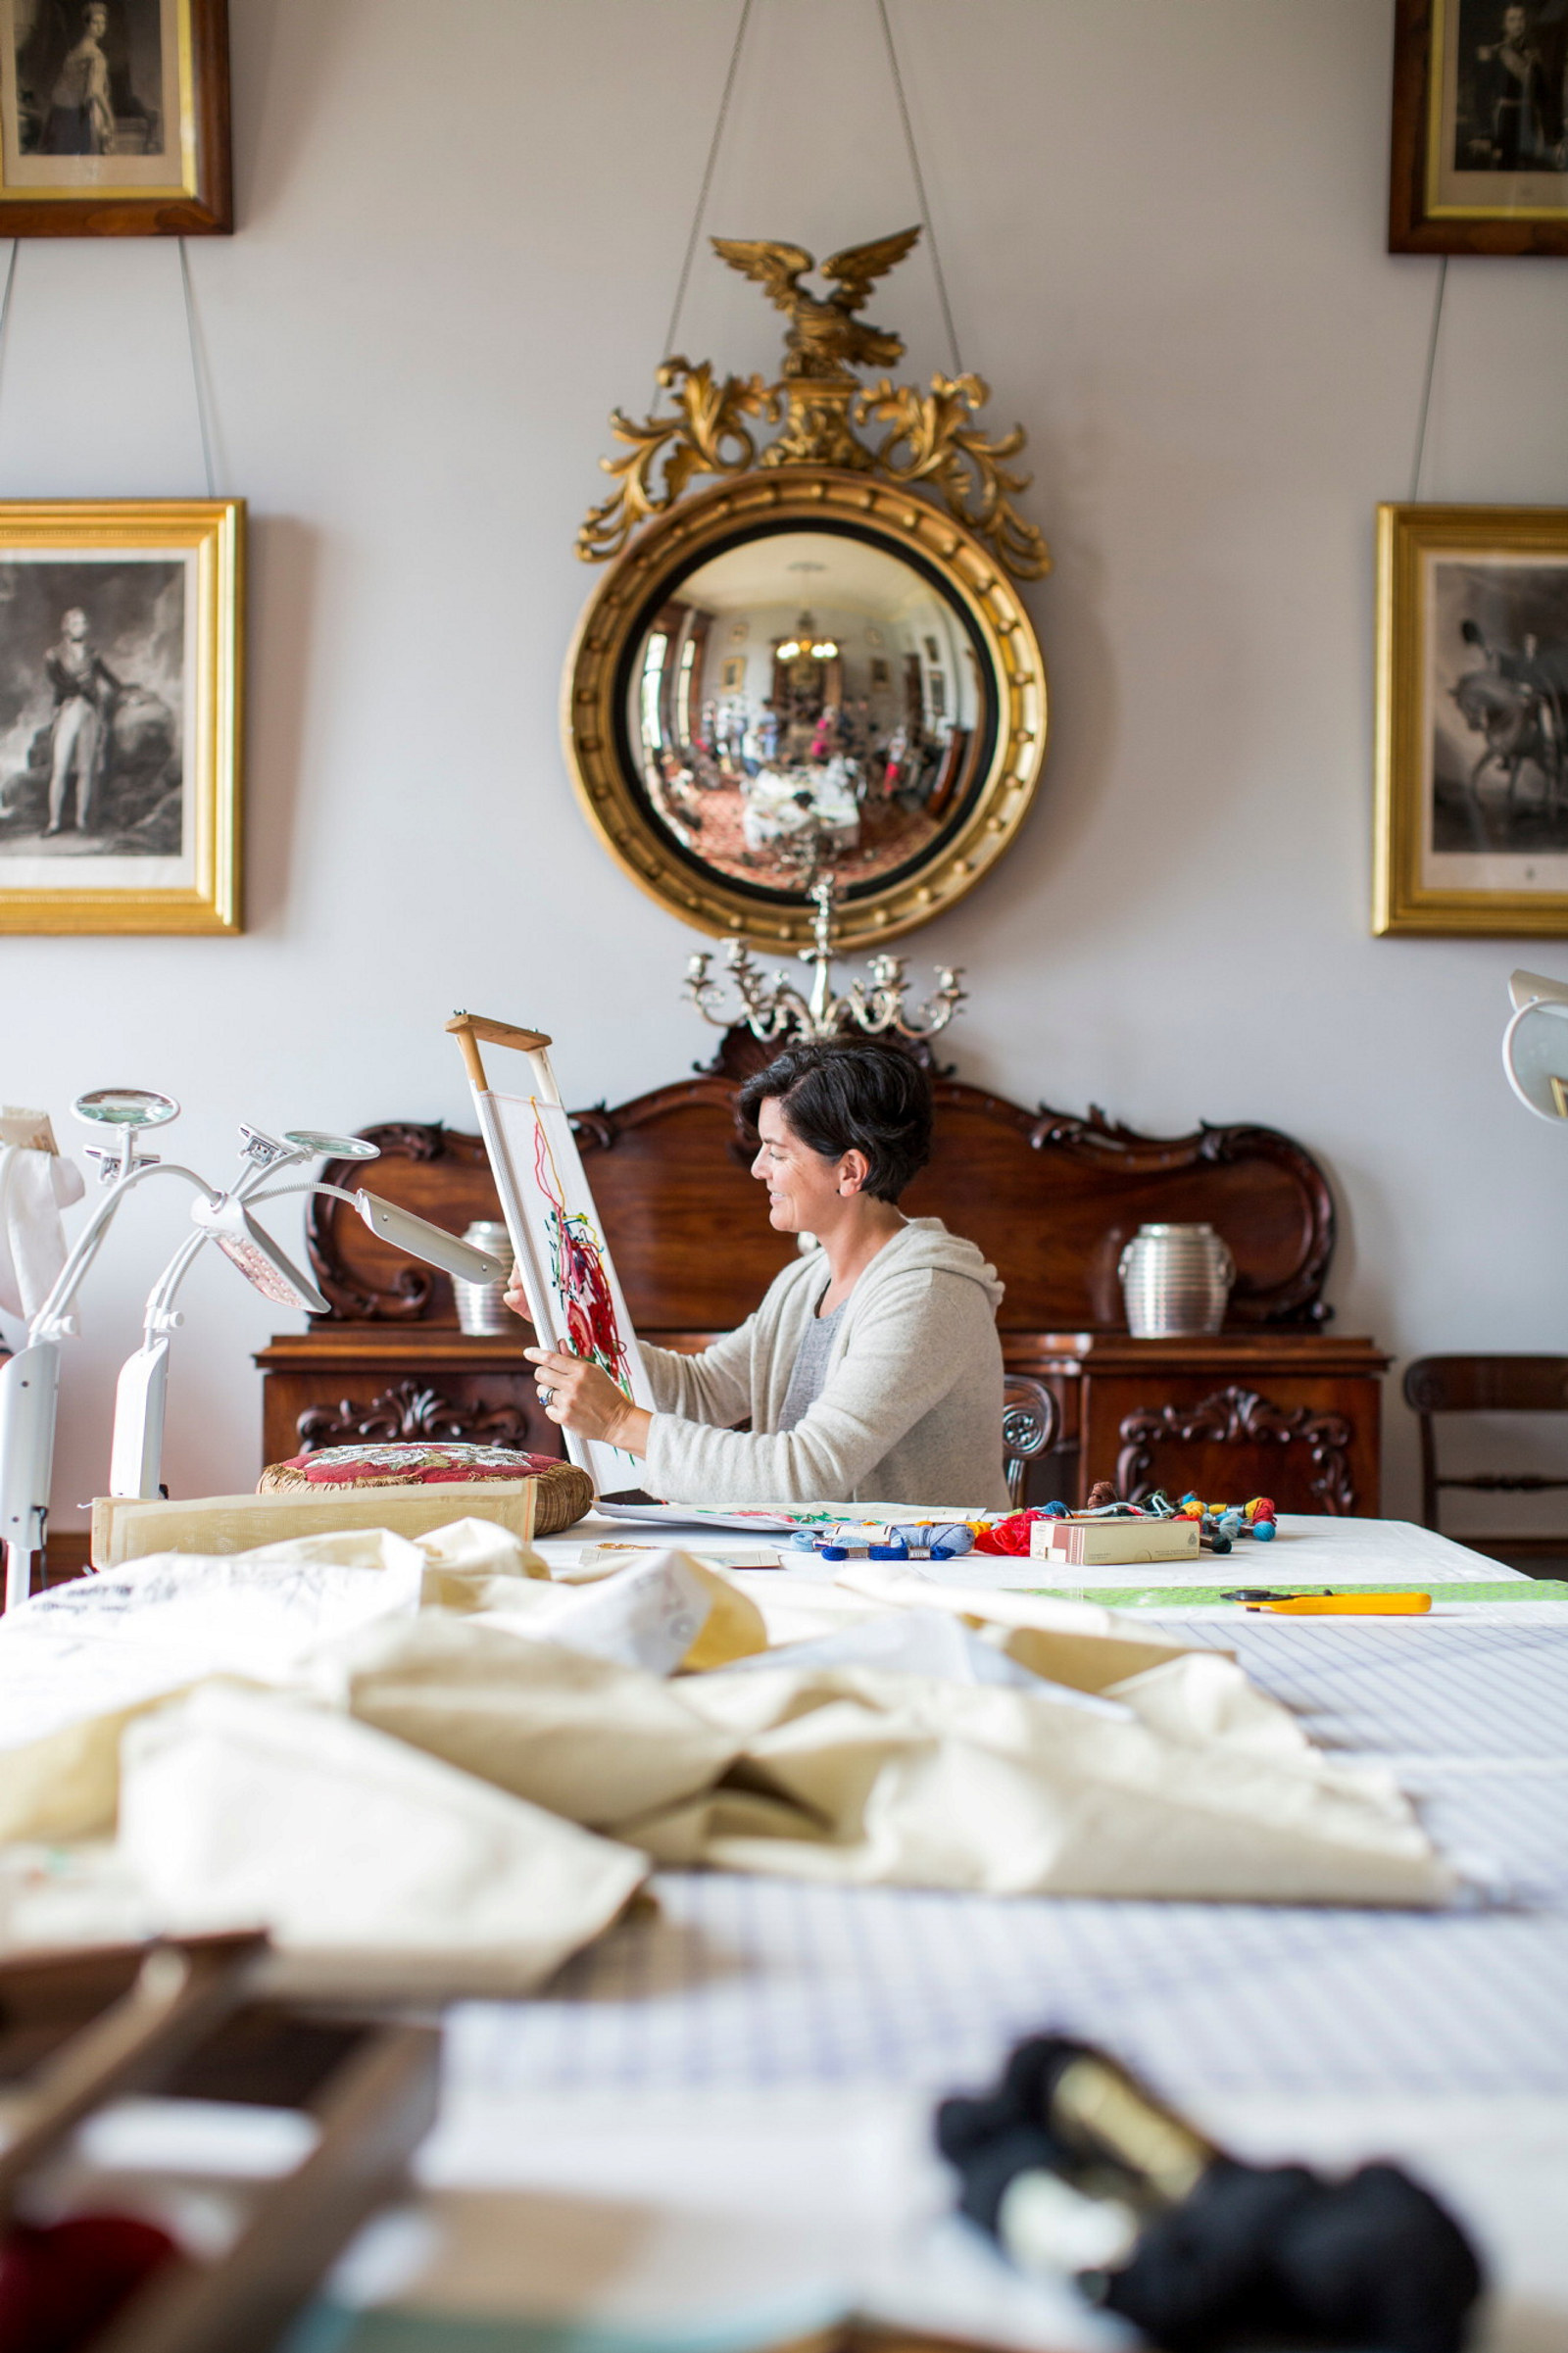 Henrietta Cheshire stitching a Berlin wool work sample from an original 1840’s pattern held in the Vaucluse House collection 